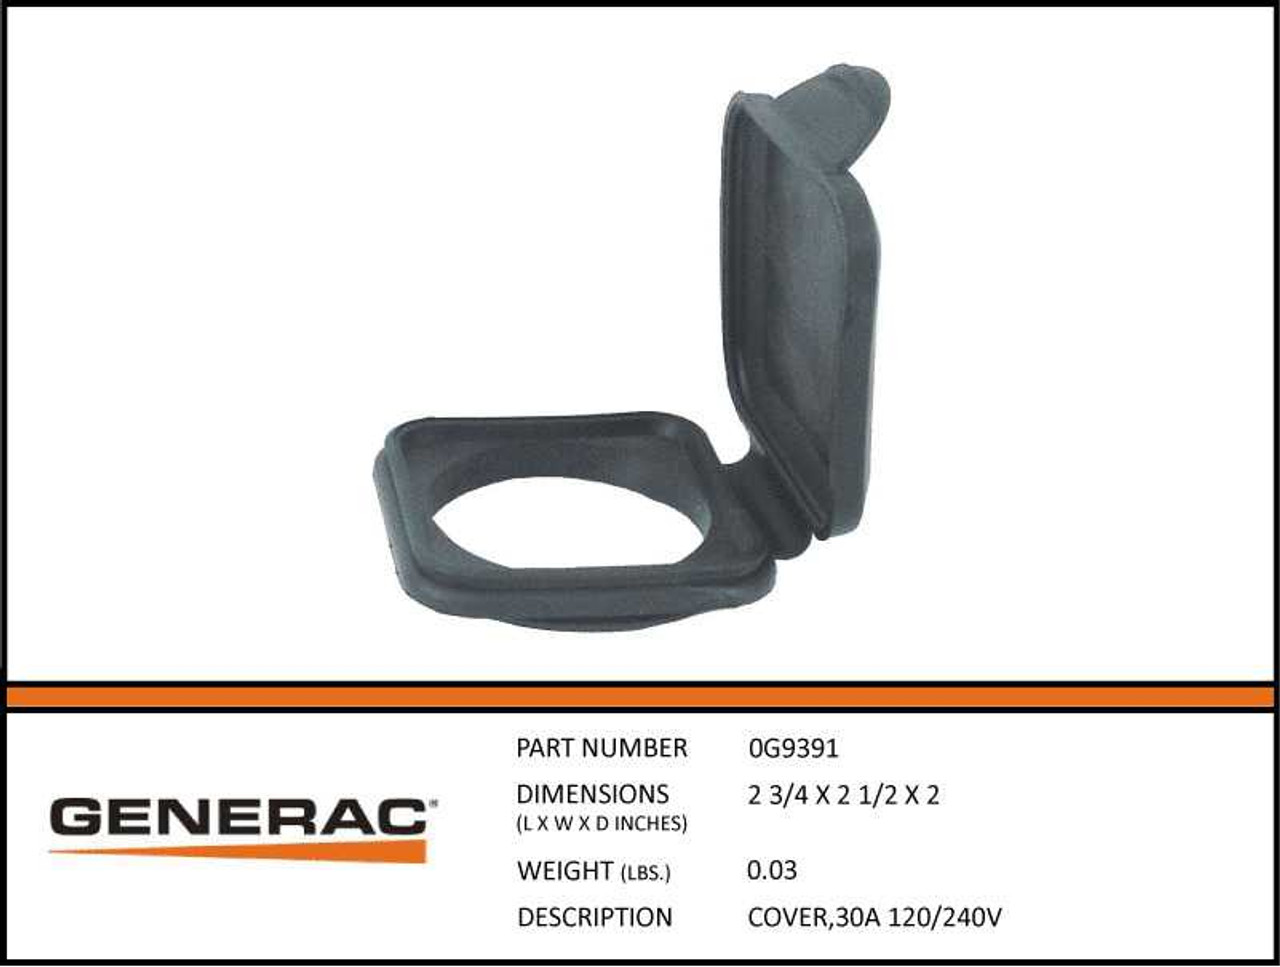 Generac 0G9391 Cover Replacement for Generator with Specs